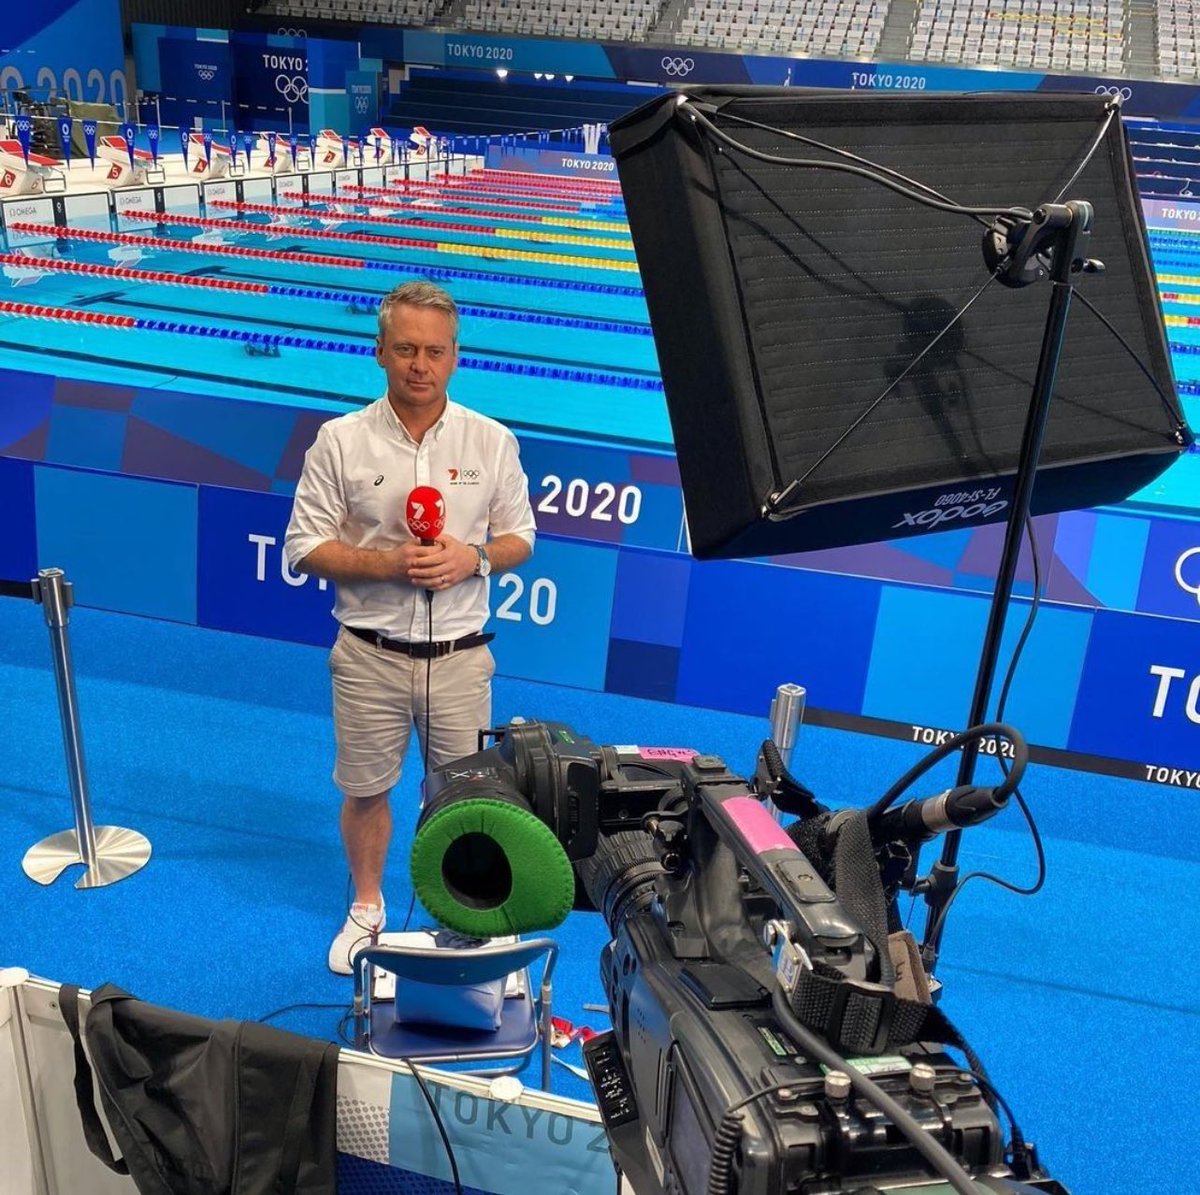 Nathan was a joy to work with in Tokyo and his poolside interviews were always heartfelt and human. The athletes loved him too. This is terribly sad news and my thoughts are with his family.